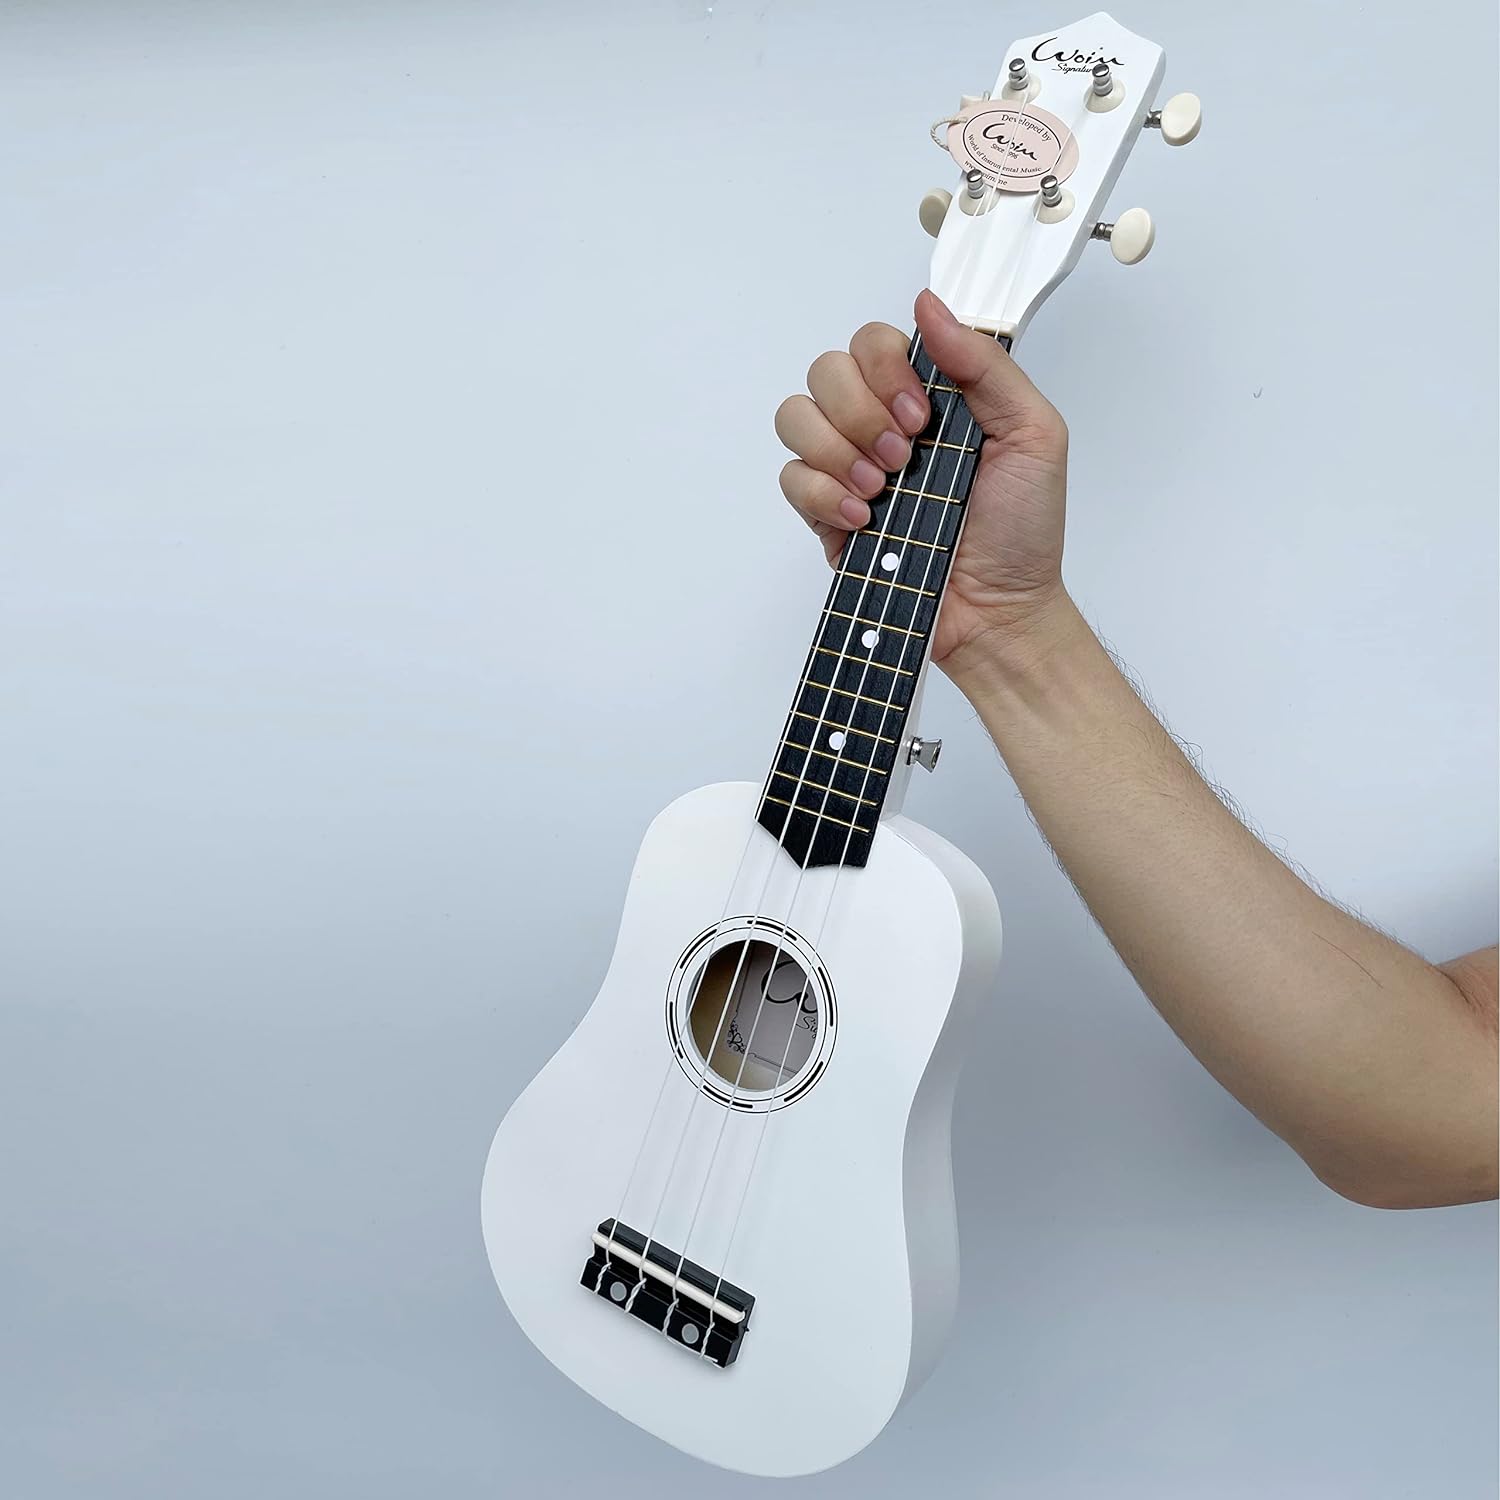 Woim Soprano 21 Inch Ukulele For Beginner with Free Pick, Cover Bag and One By One Video Call Tutorial Sesson (White)